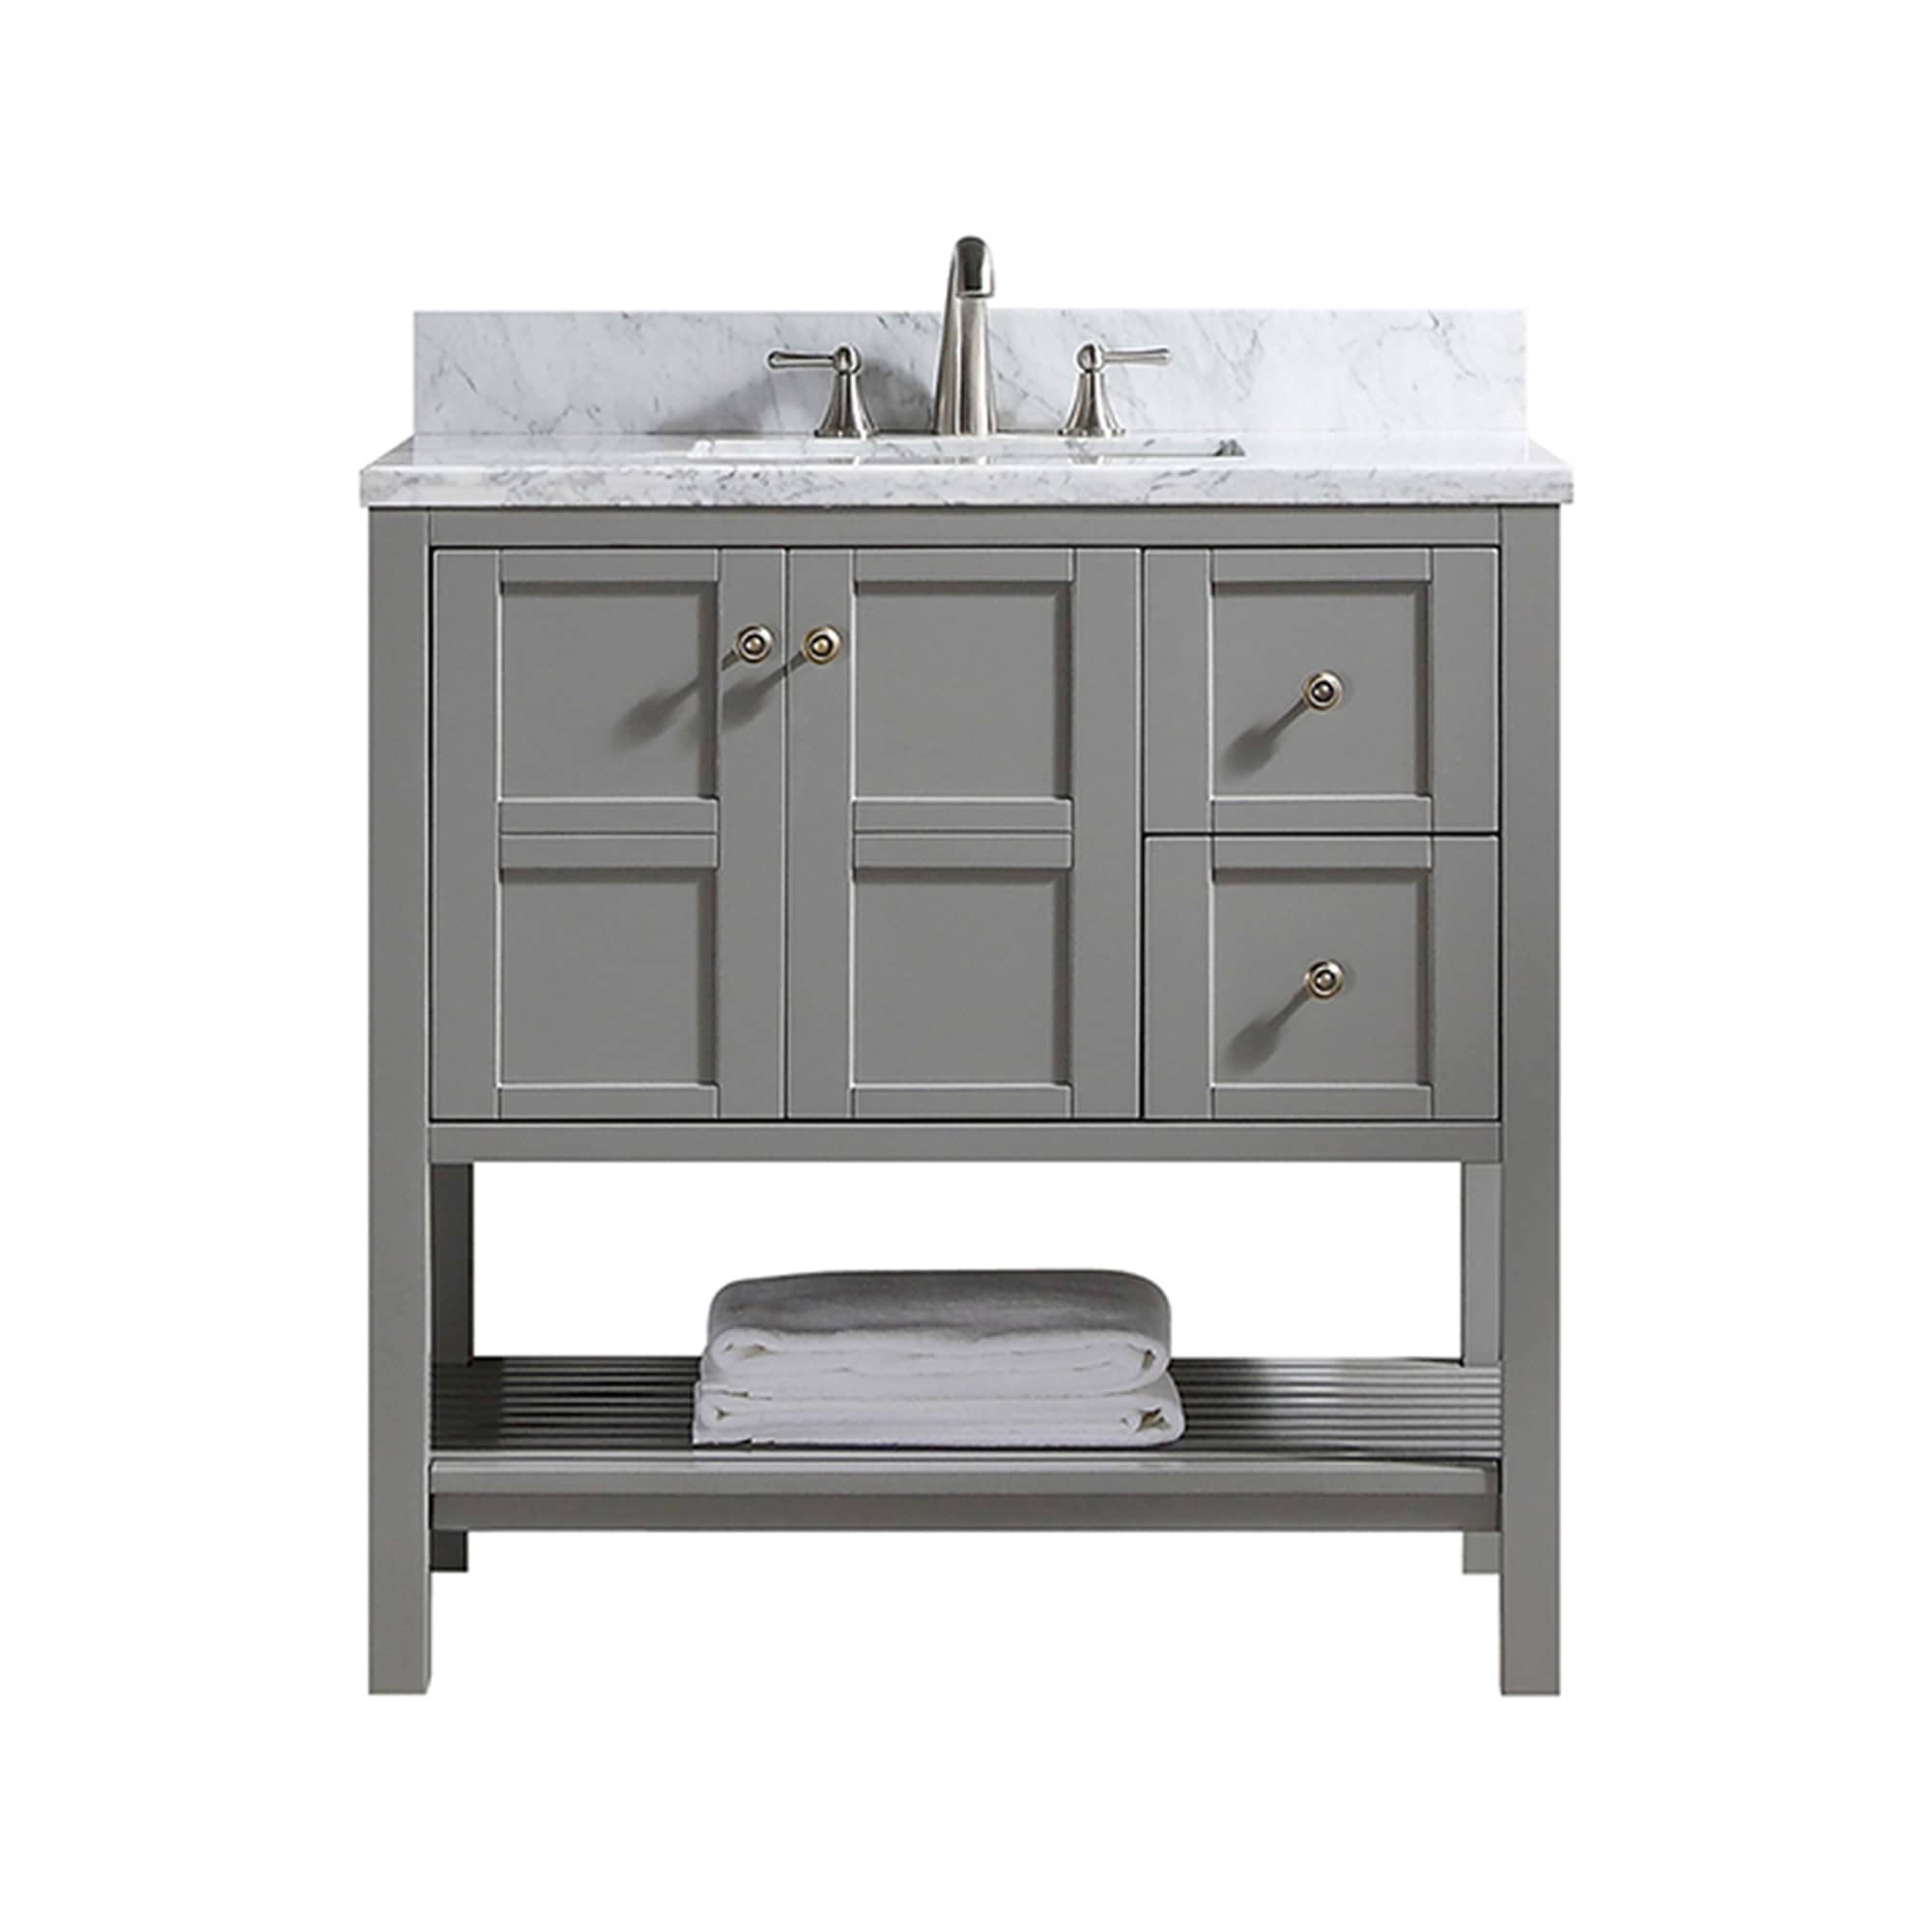 CASAINC 36 Inch Bath Vanity in Gray with White Top and Basin (36W x 22D x 35.4"H )